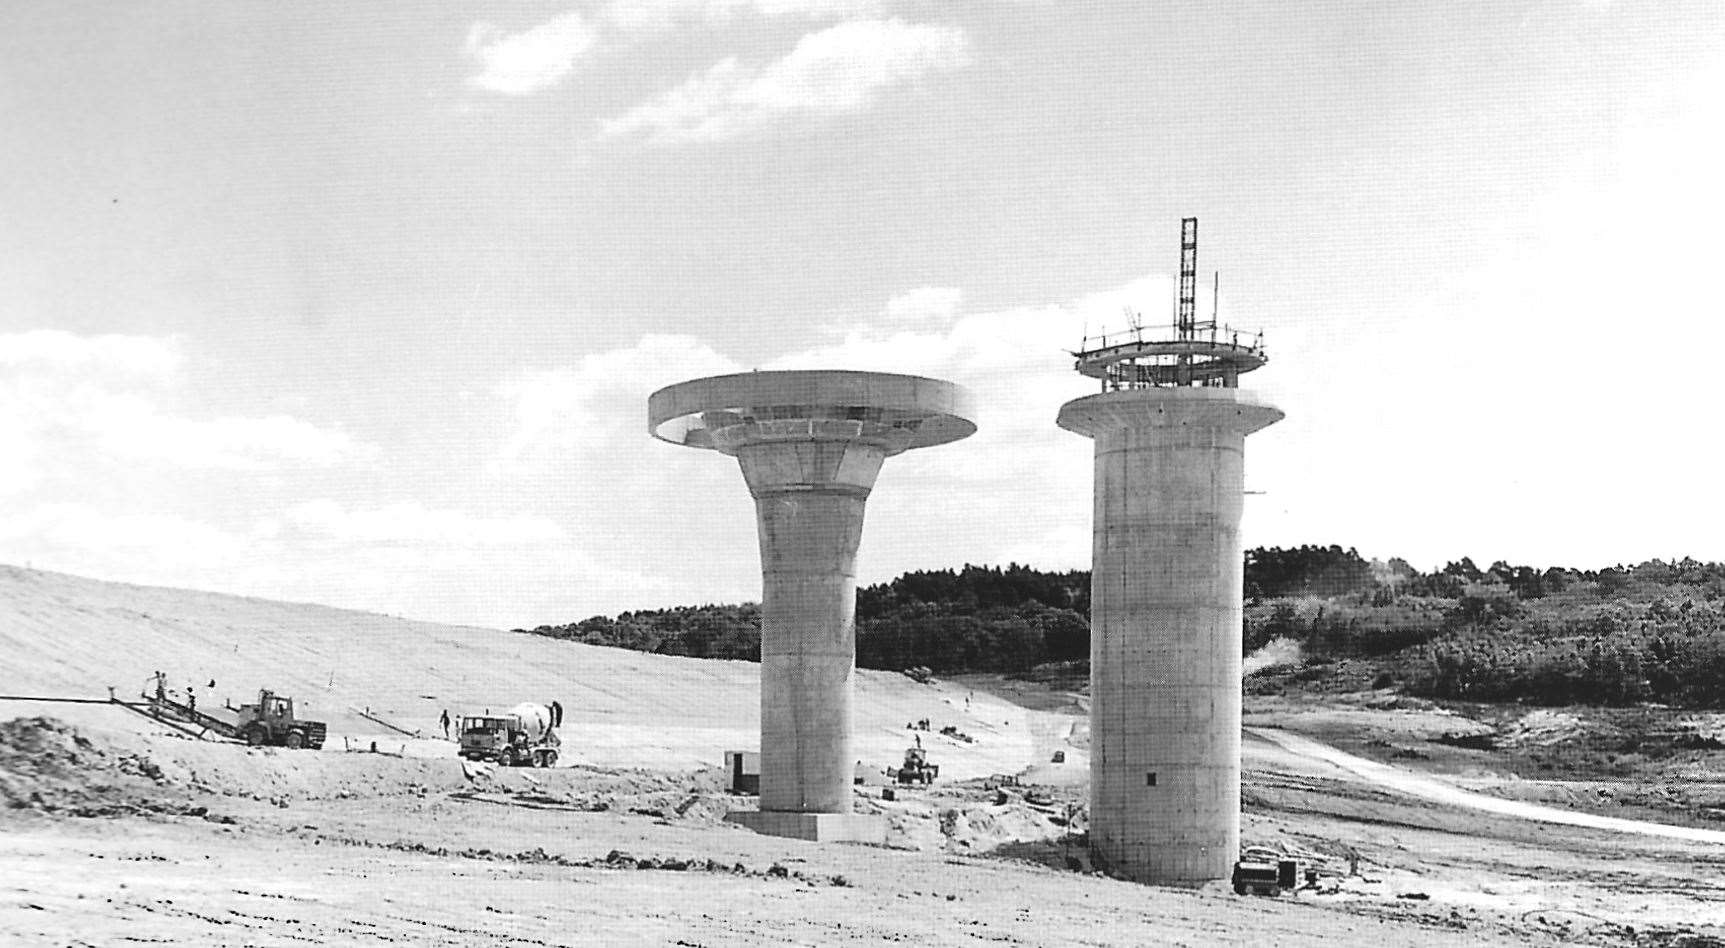 The towers under construction